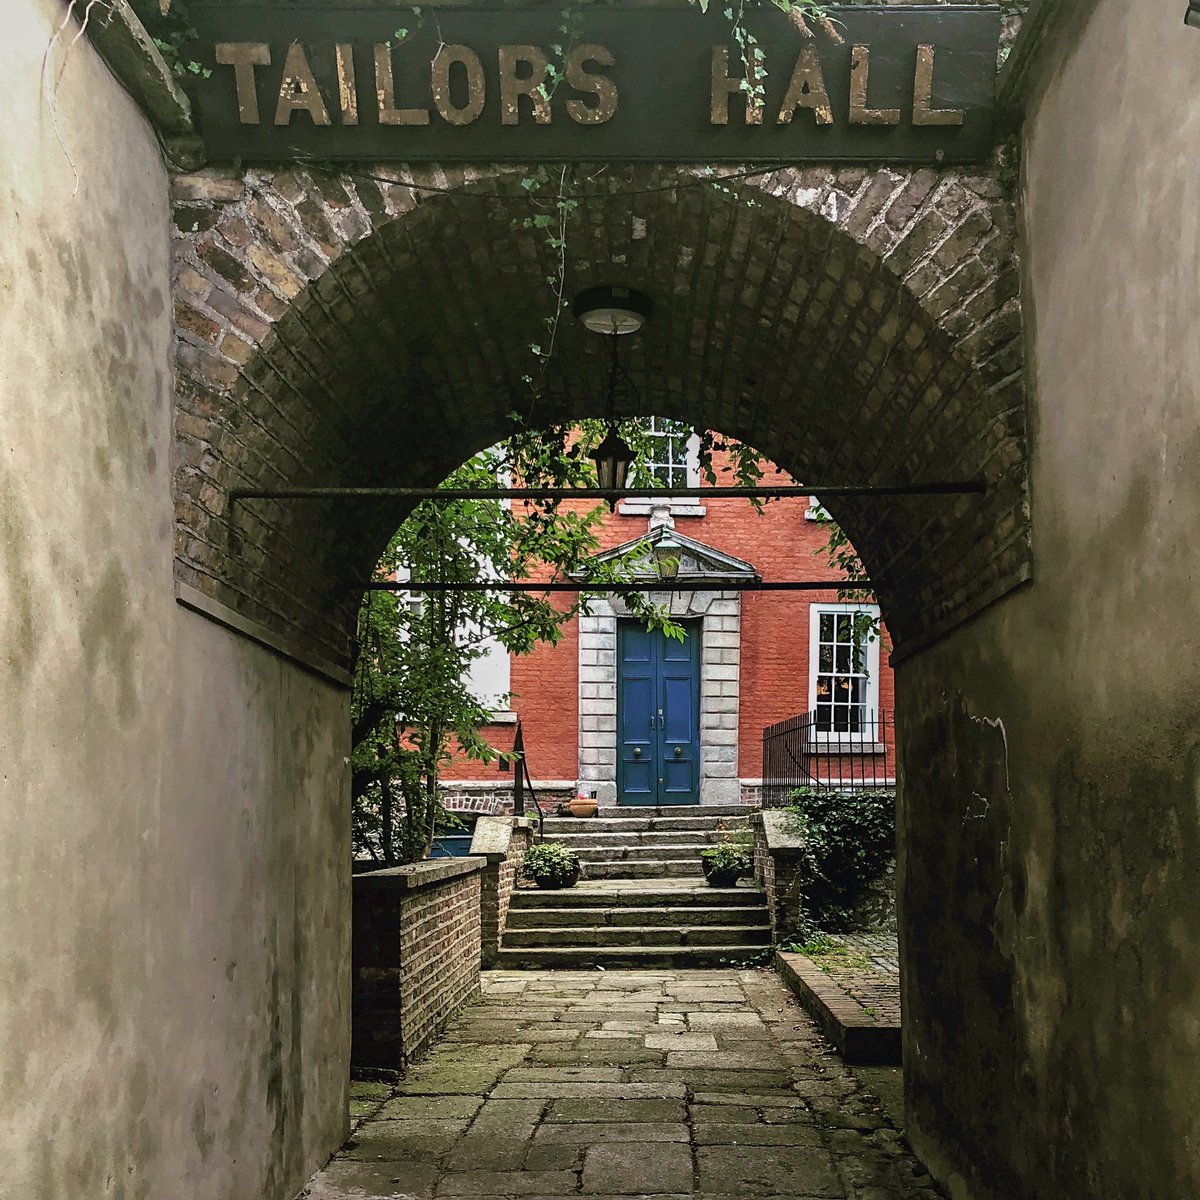 An Taisce are finalising plans to develop part of the historic Tailors Hall as cafe/ restaurant. The new cafe will open up the premises to High Street and allow visitors to experience Dublin’s last surviving guildhall, which dates to 1707.